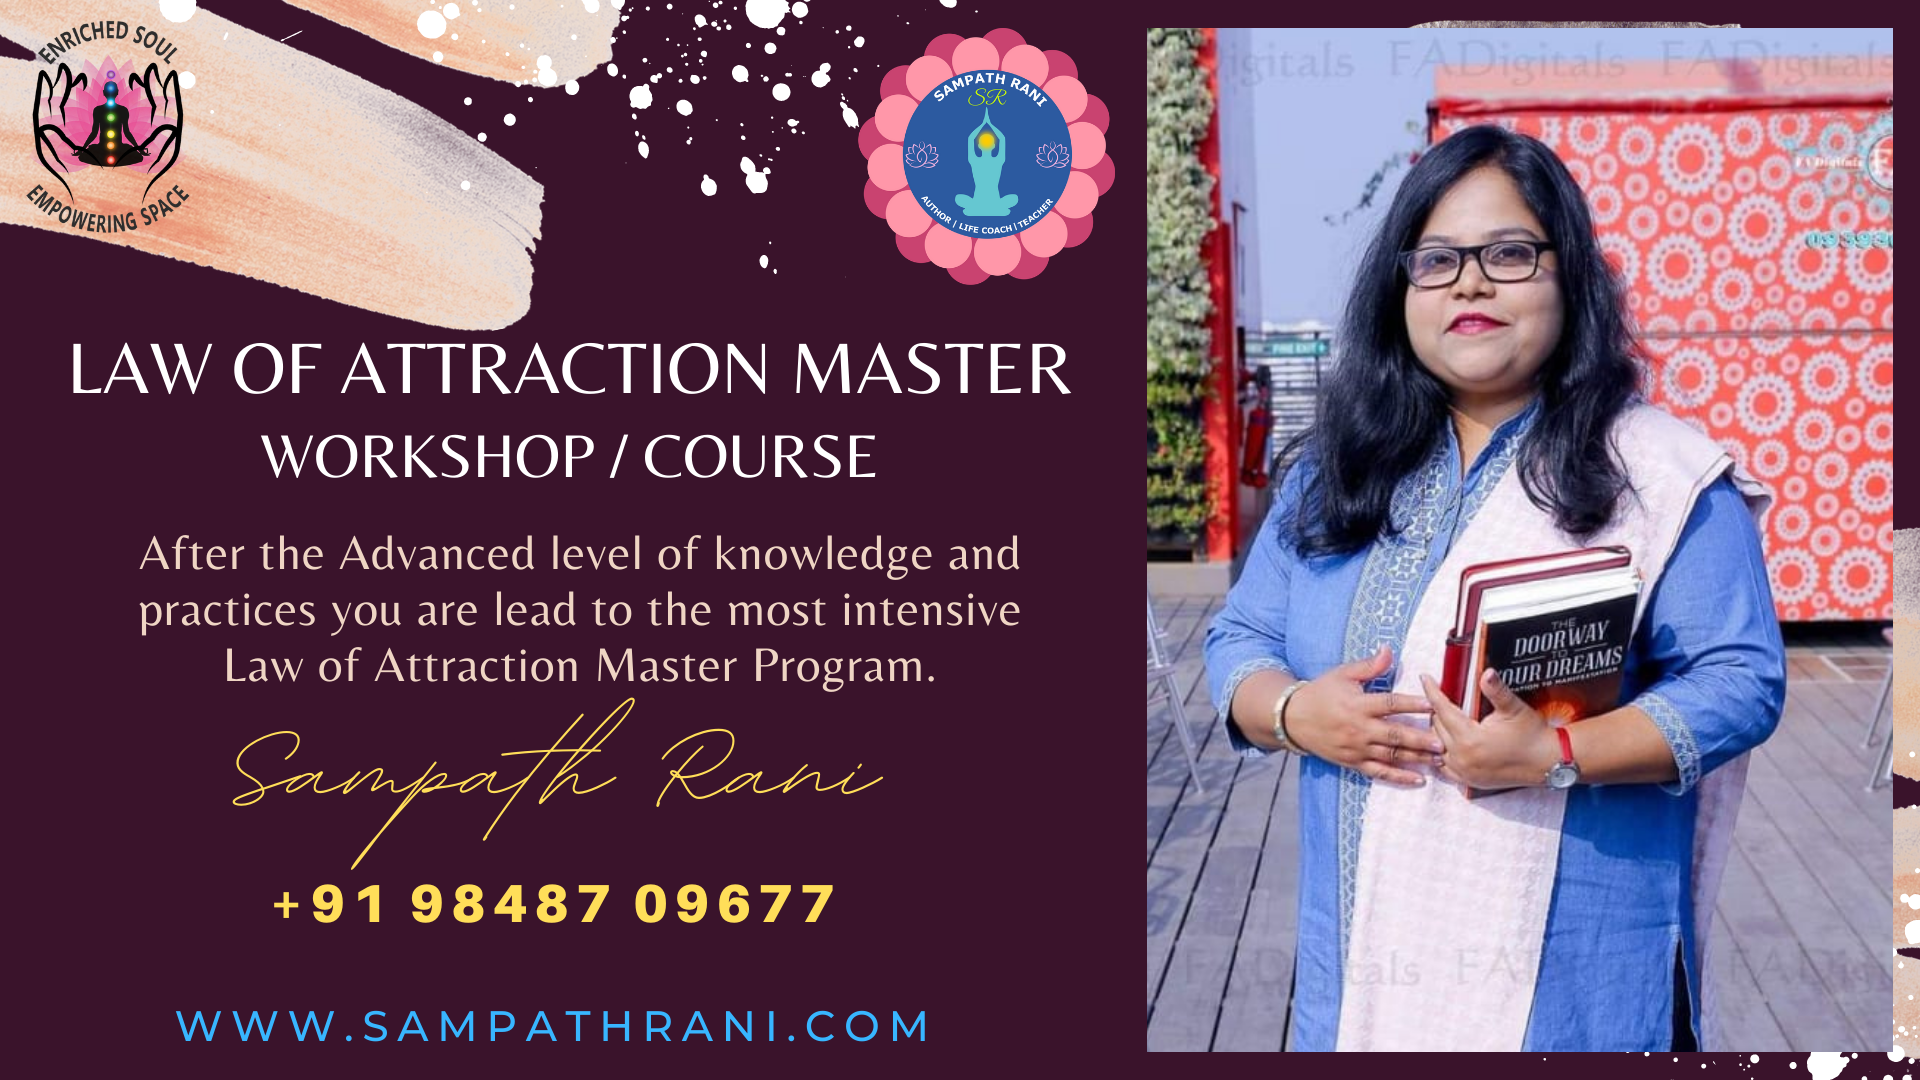 Law of Attraction Master Workshop, Course - by Sampath Rani - Bhopal